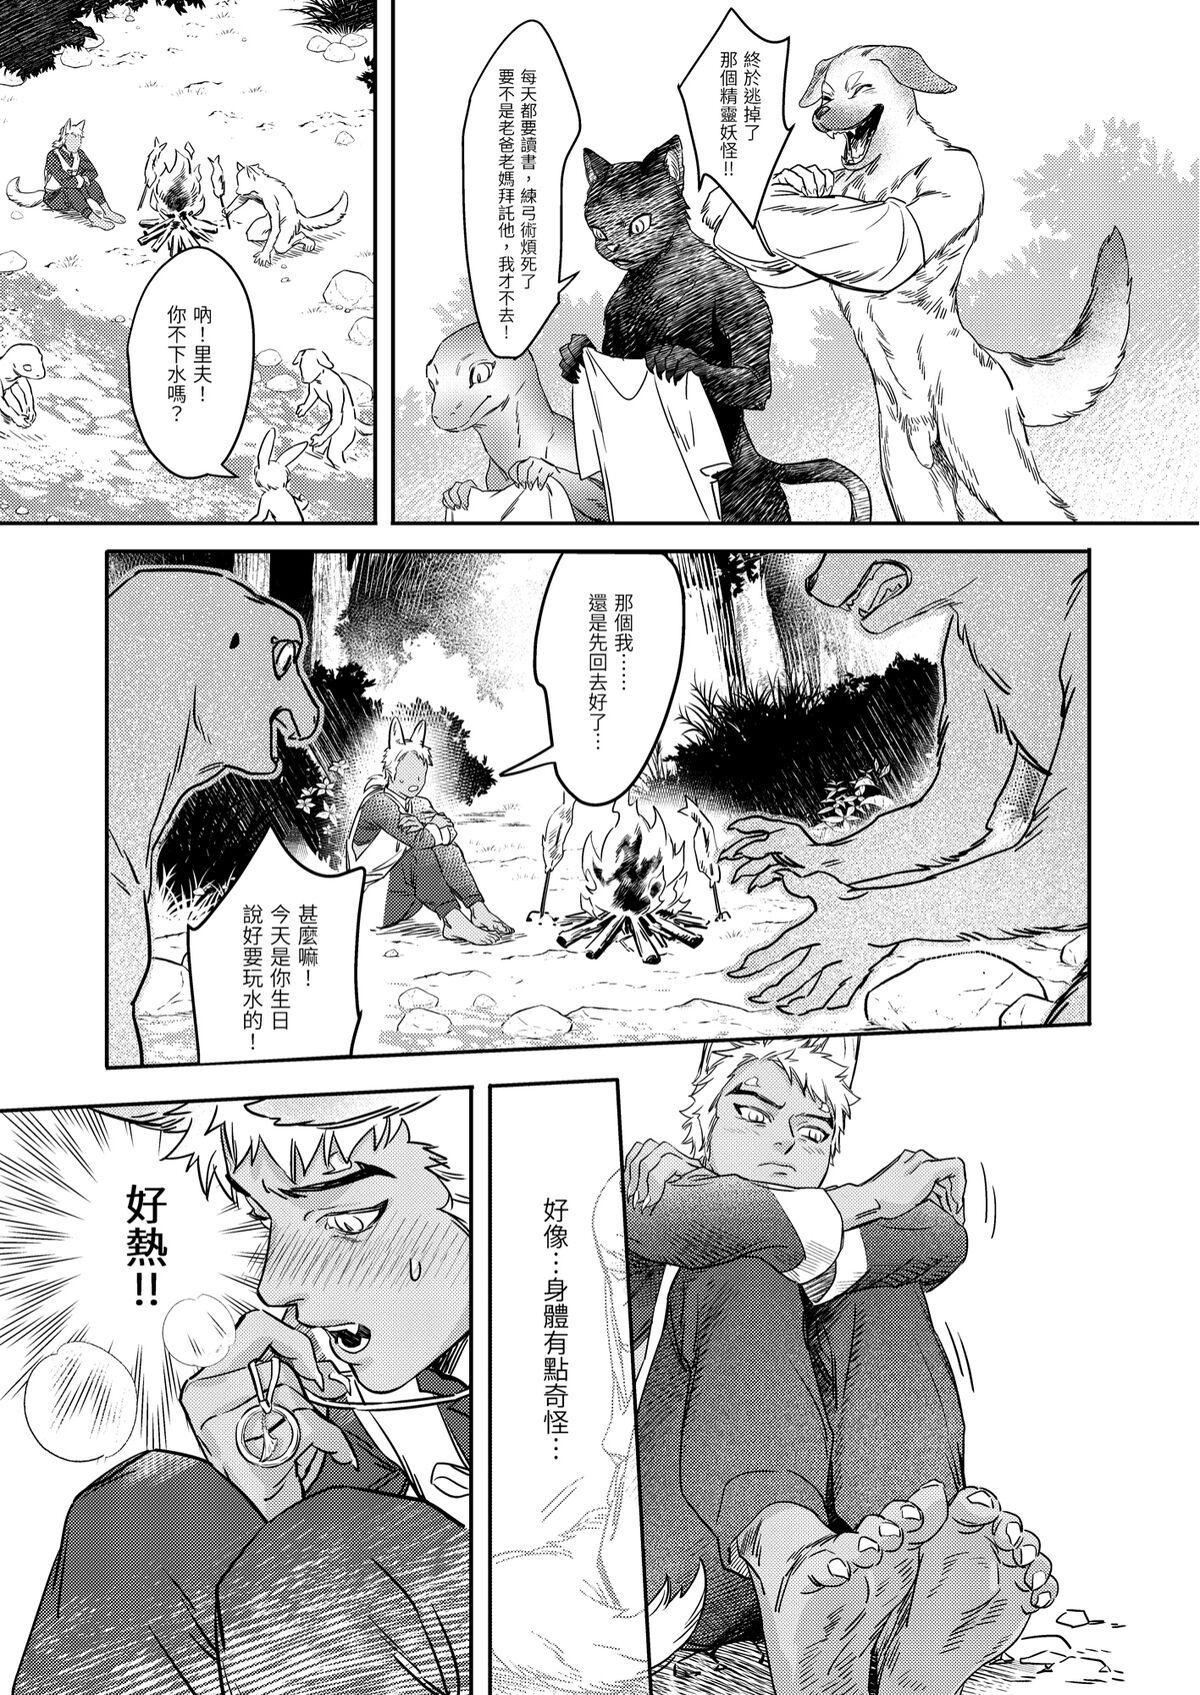 Reverse Cowgirl 精靈與半獸人 - Original Foreplay - Page 11